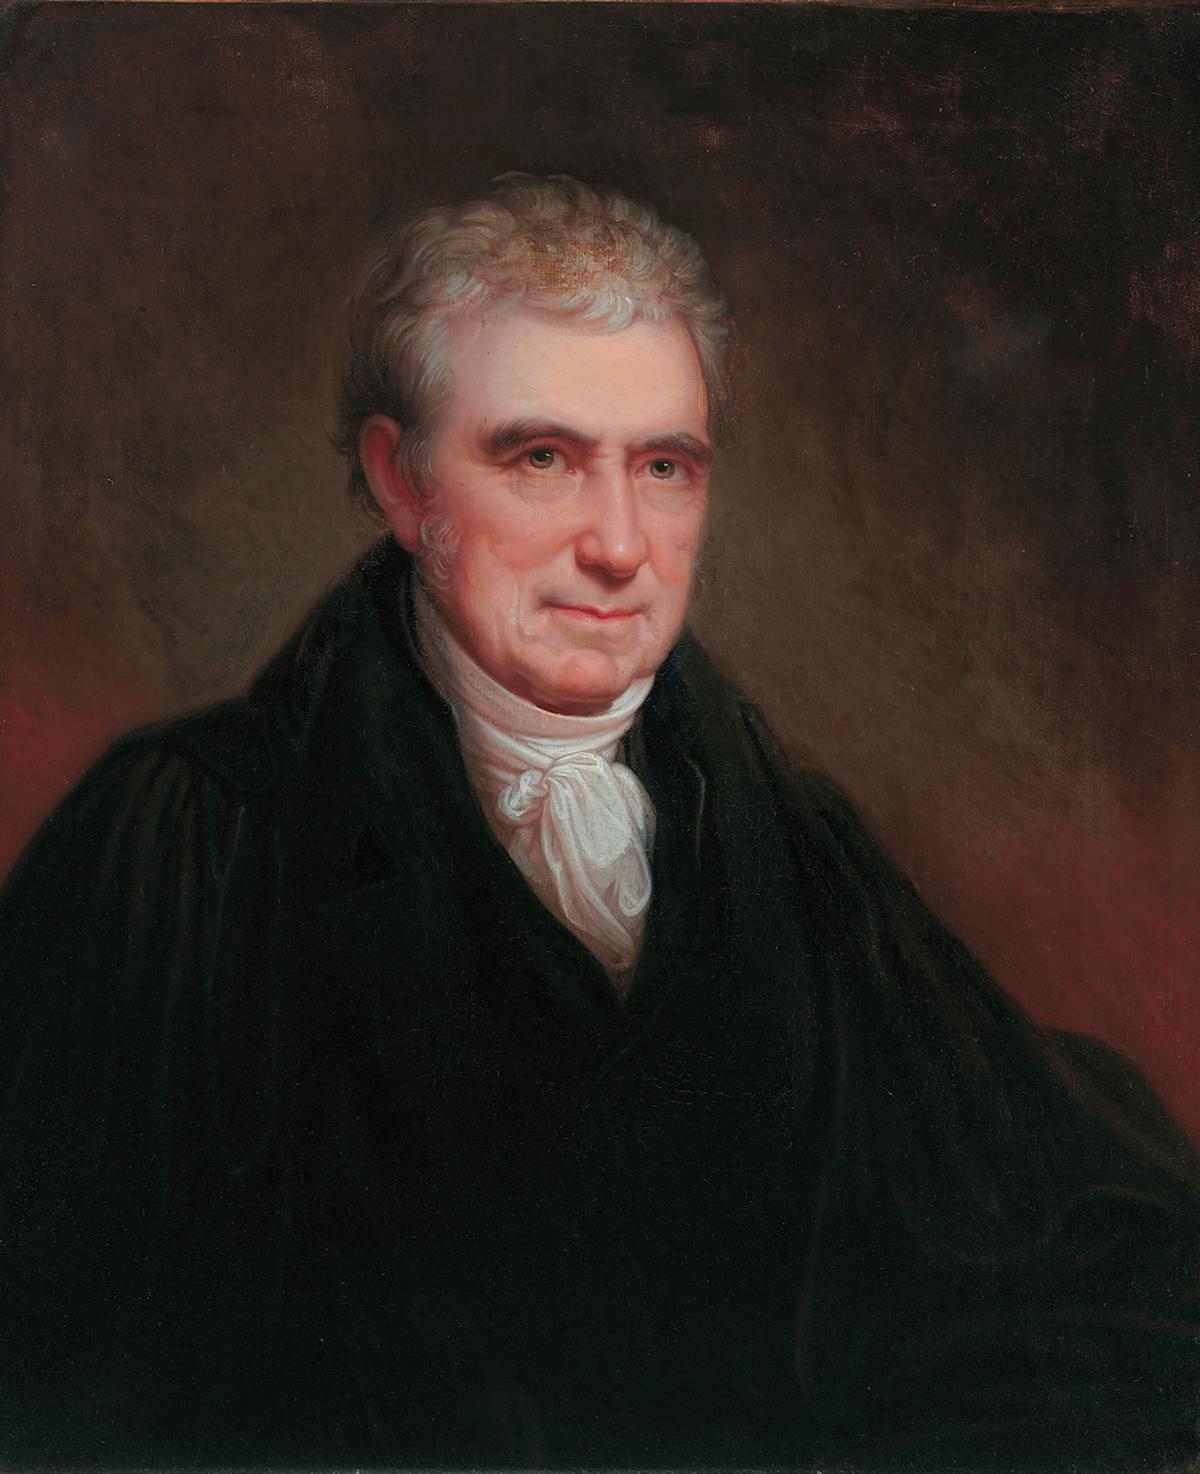 A Portrait of Chief Justice Marshall, 1834, by Rembrandt Peale. Oil on canvas. Virginia Museum of Fine Arts. (Public Domain)